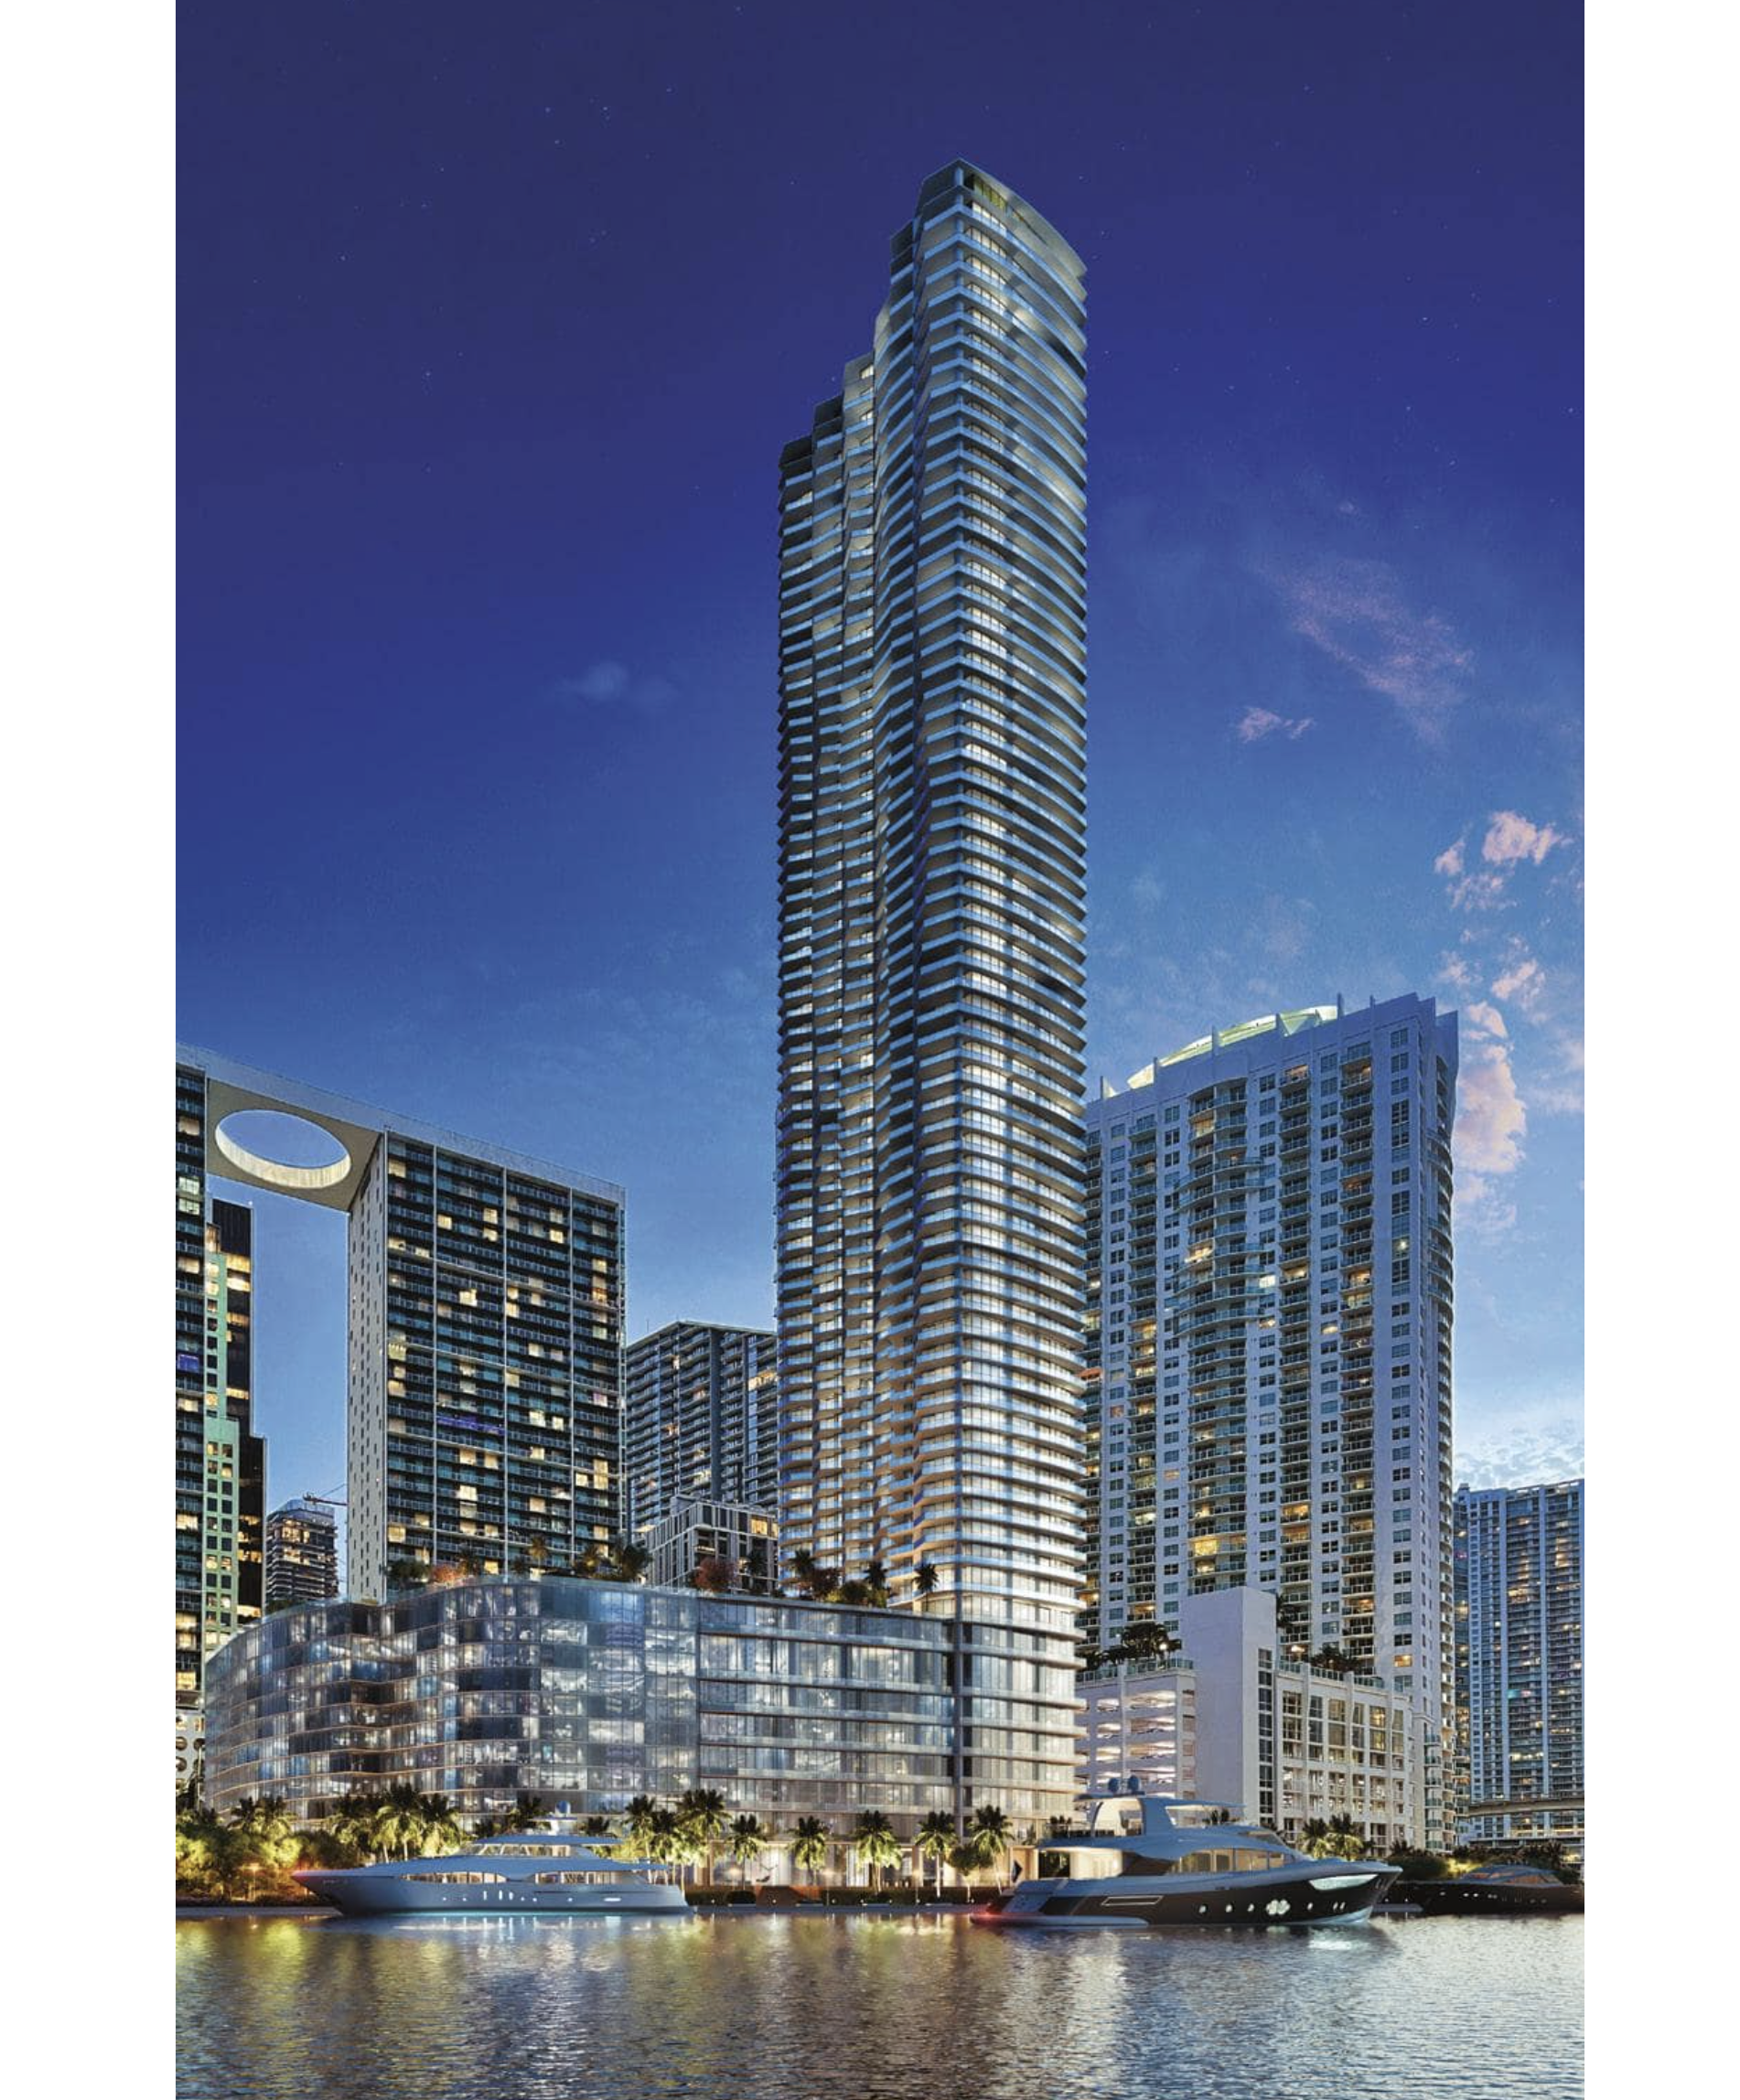 Baccarat Residences Brickell. Designed by Arquitectonica.